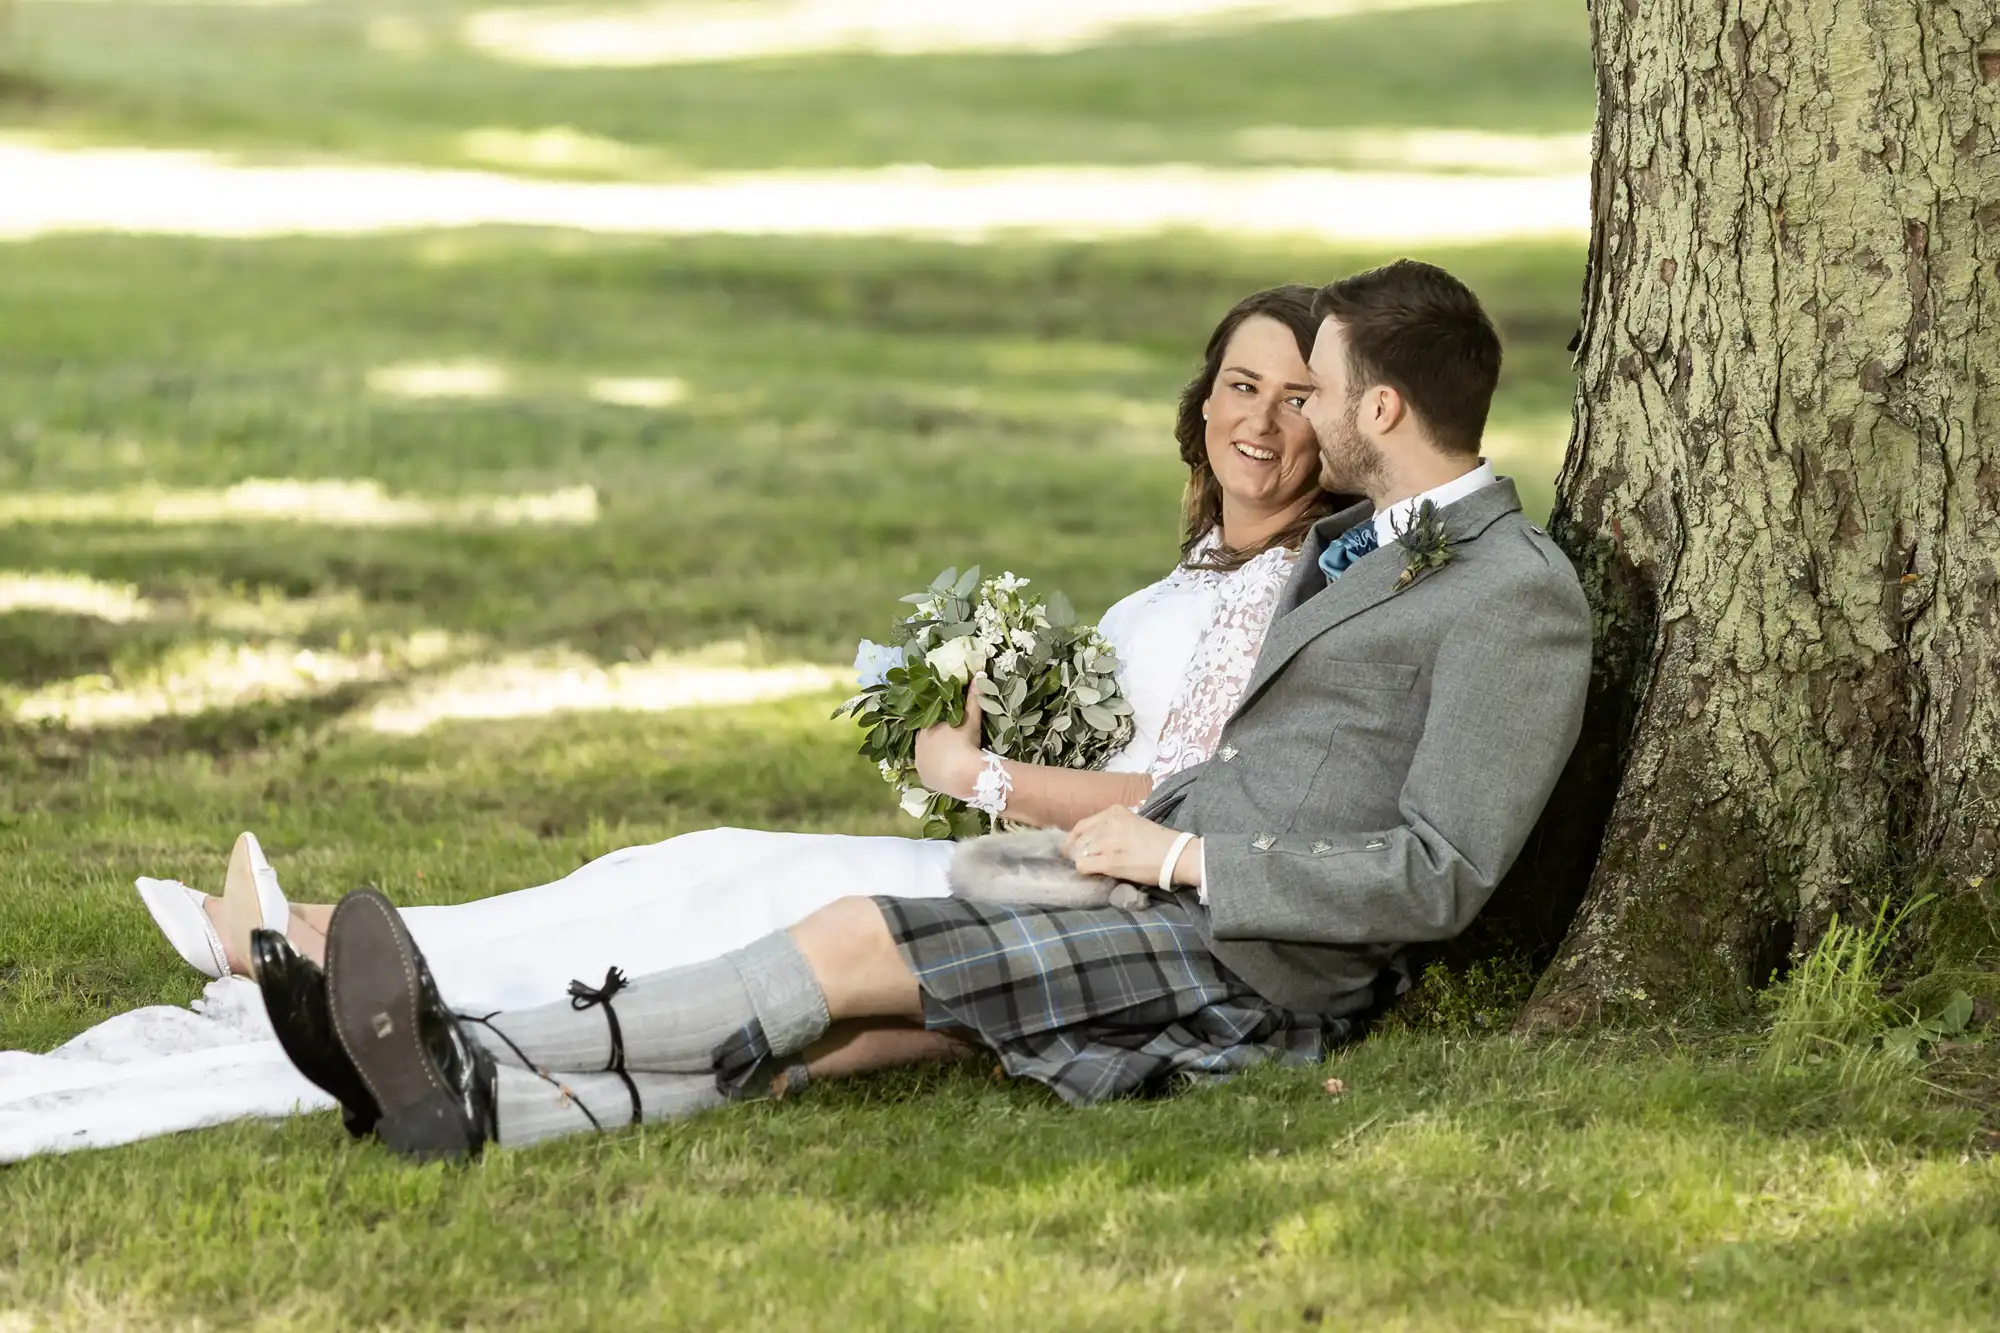 A newlywed couple in wedding attire smiling and sitting under a tree, with the groom wearing a kilt and the bride holding a bouquet.